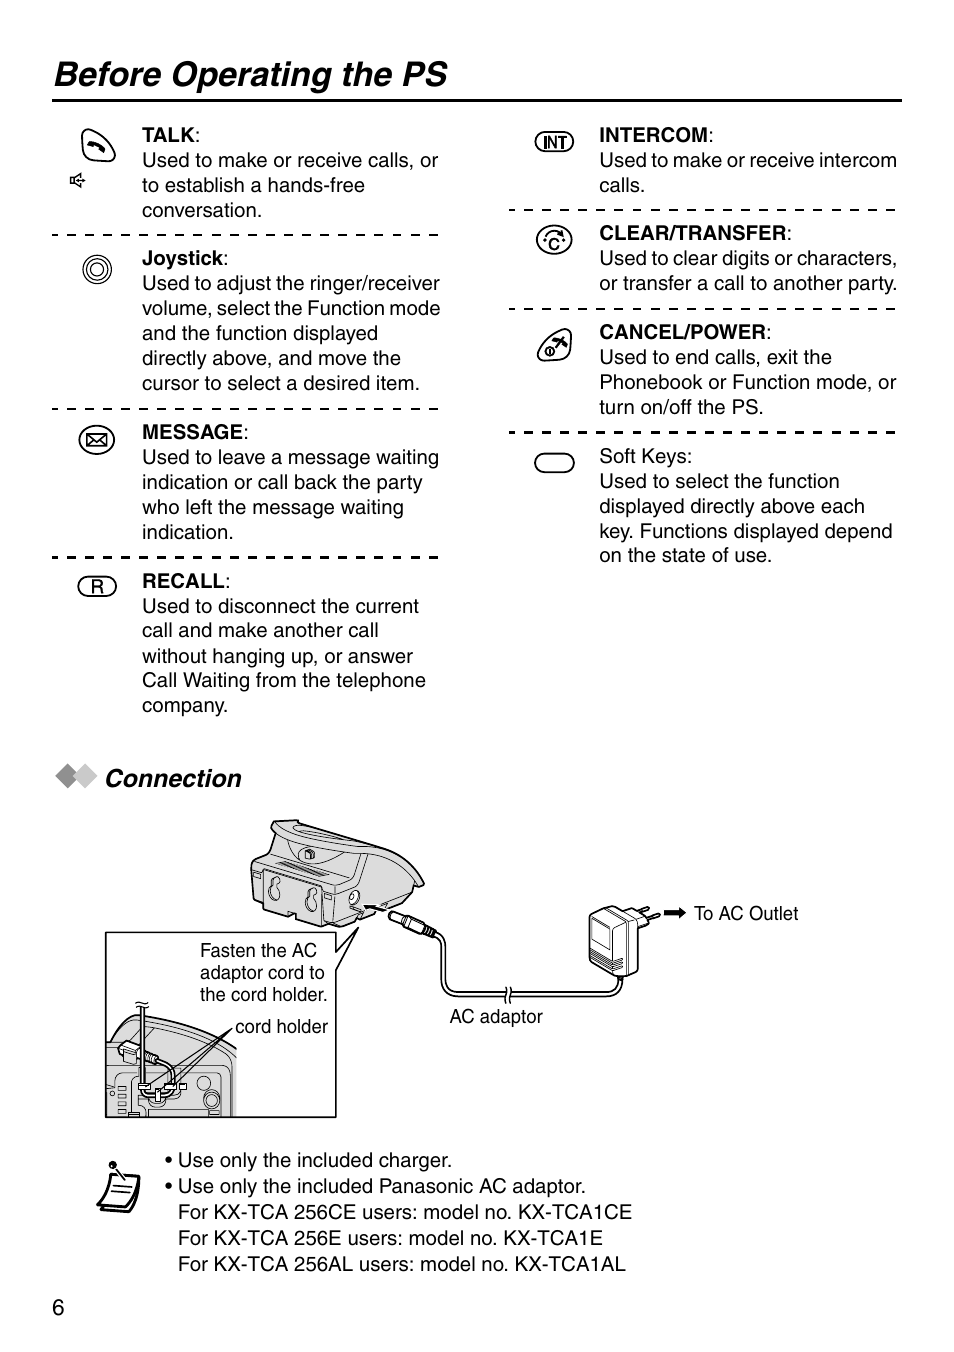 Connection, Before operating the ps | Panasonic KX-TCA256 User Manual | Page 6 / 56